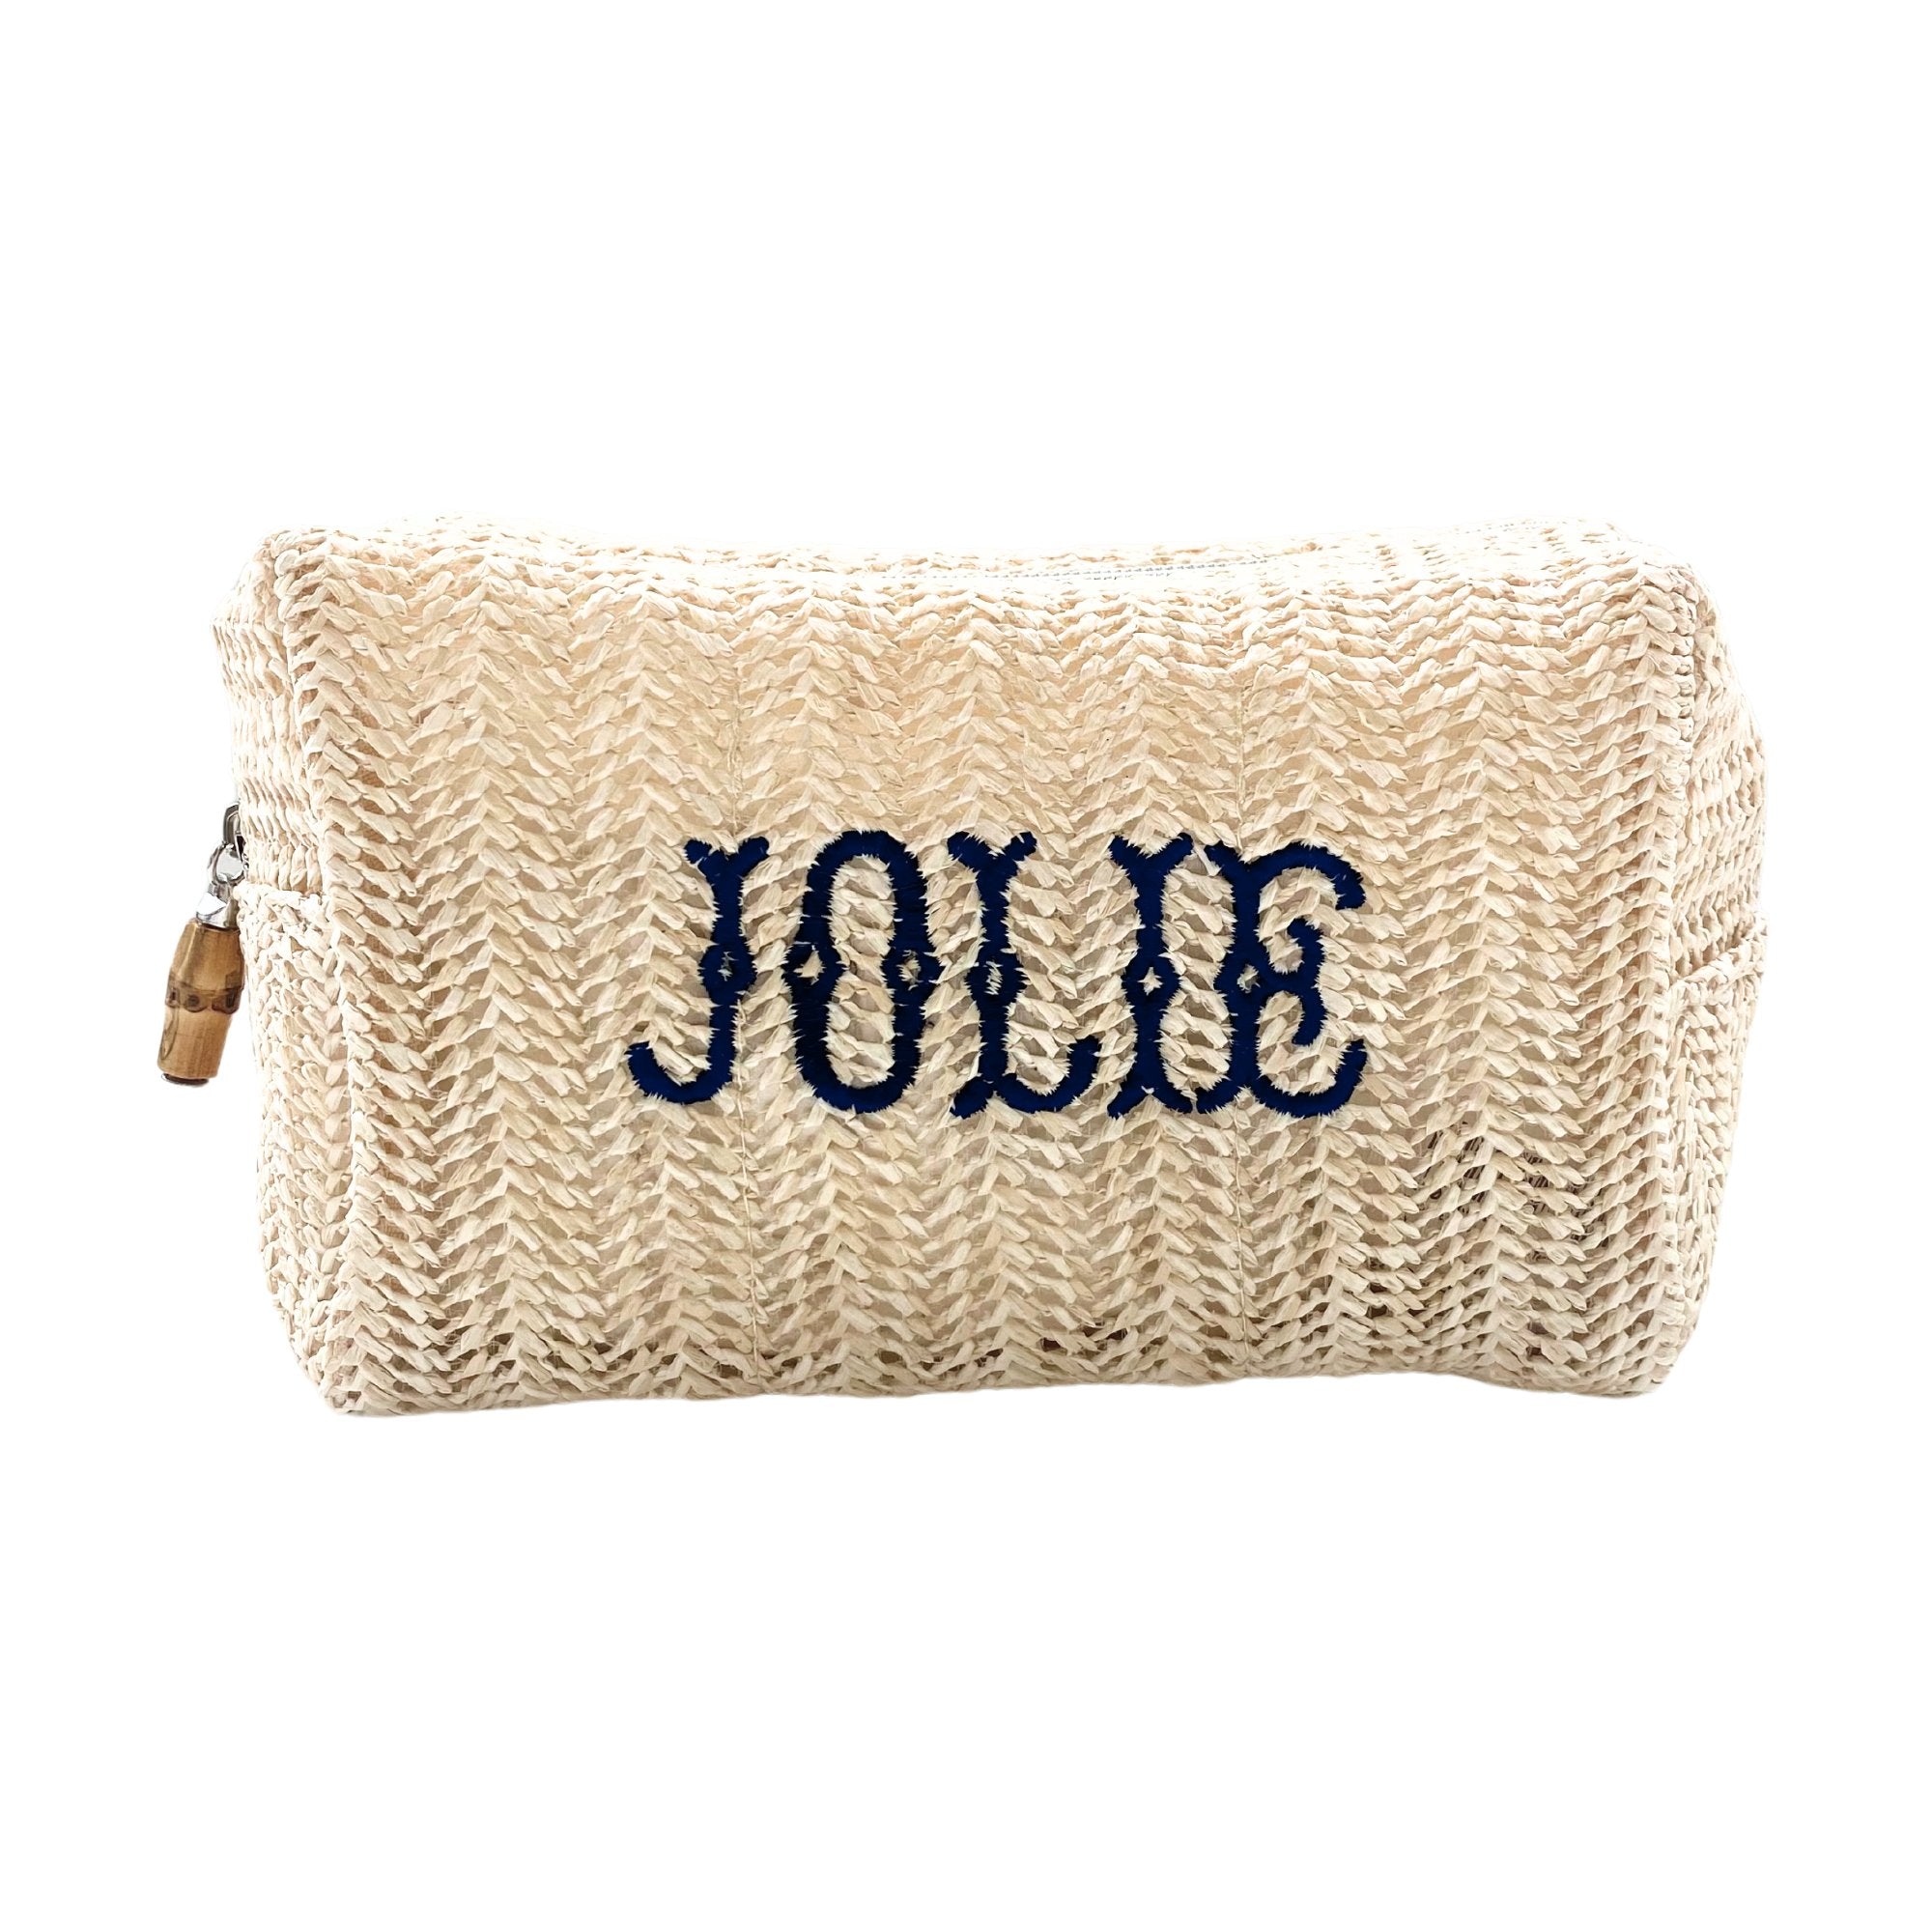 A straw pouch is customized with a name embroidered in navy font